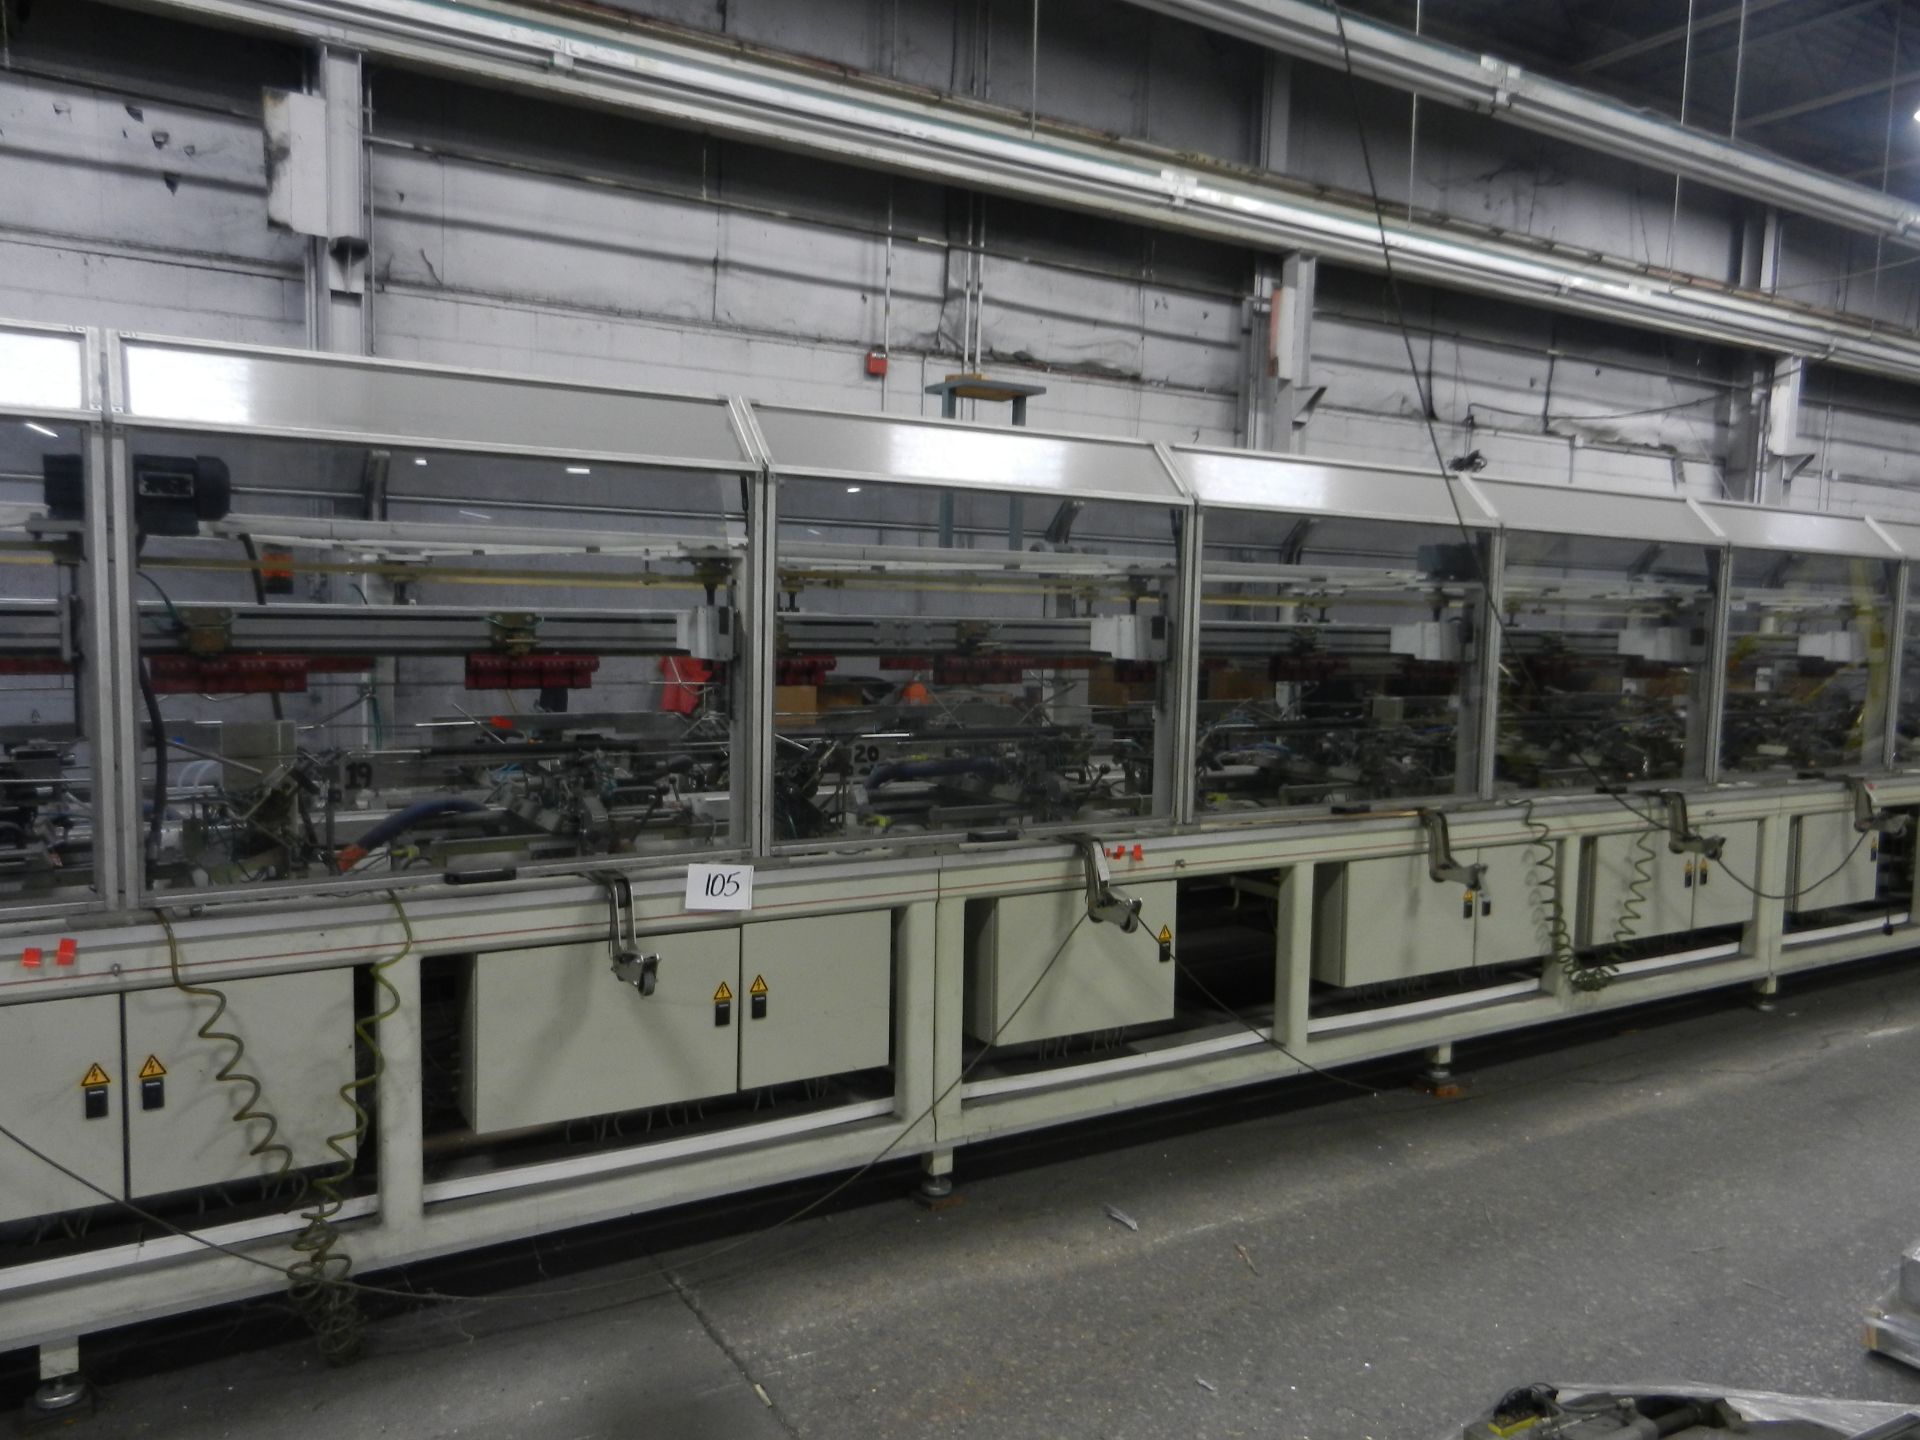 Mecland Mod# Indexcut 2000, 28 Station Automatic Thumb Cutting Machine with Extra Tooling - Image 3 of 9